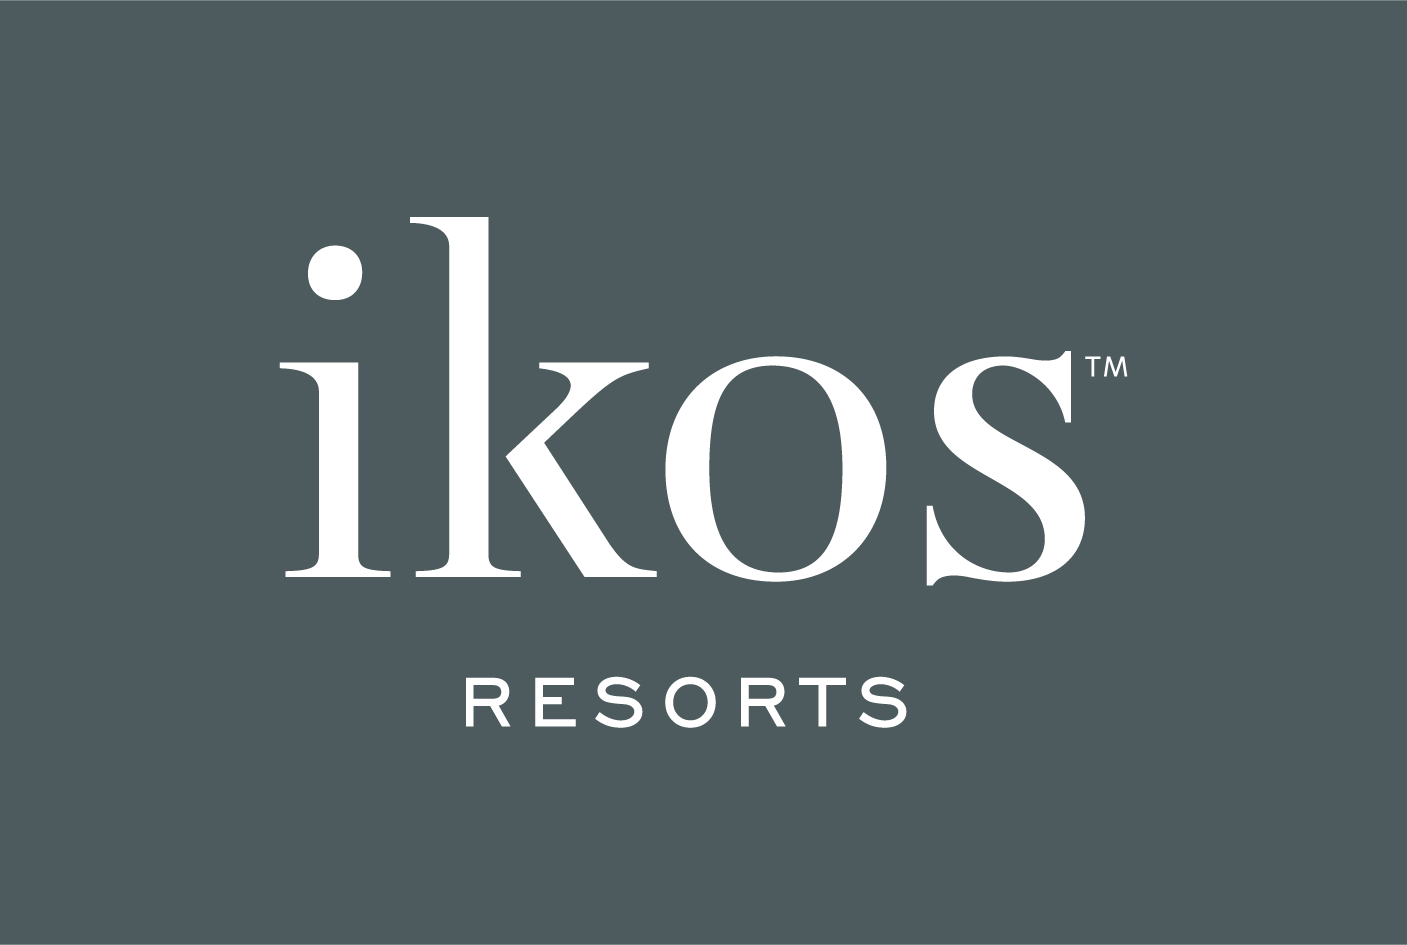 This self-guided tour is sponsored by Ikos Resorts, a collection of luxury resorts, including two resorts in Corfu.